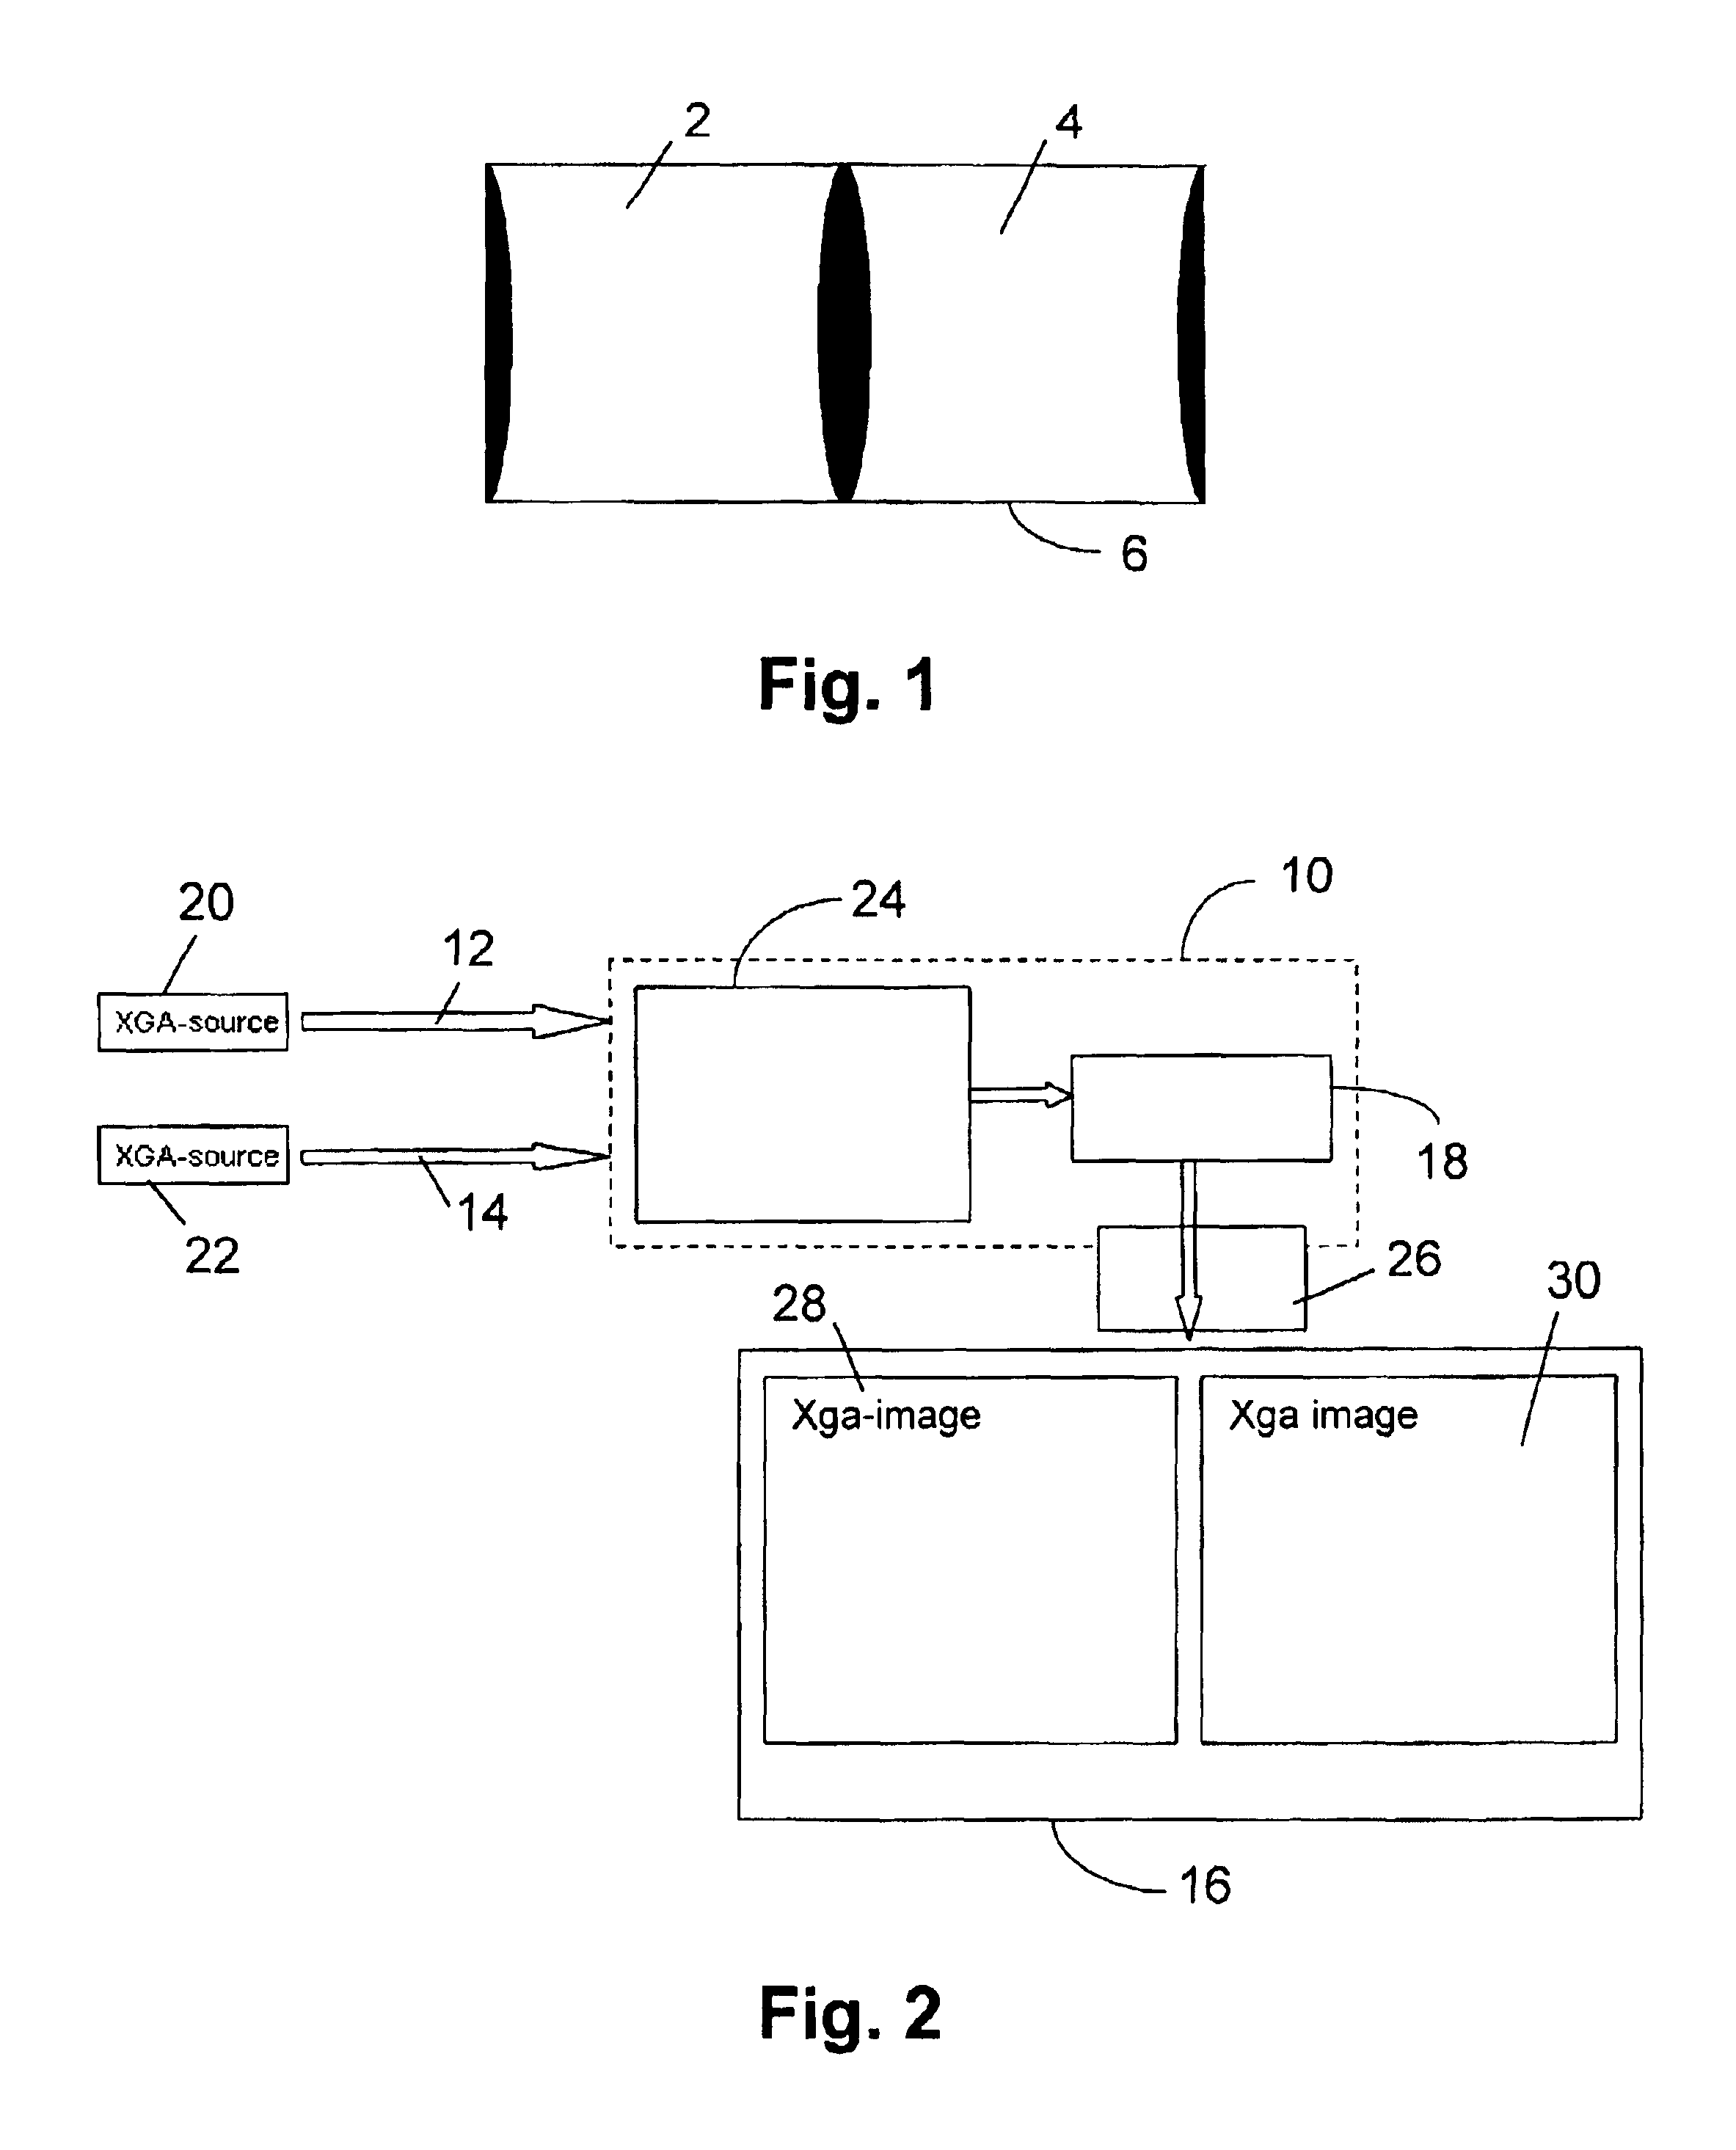 Full resolution multiple image projection system and method for projecting two images in full resolution adjacent each other